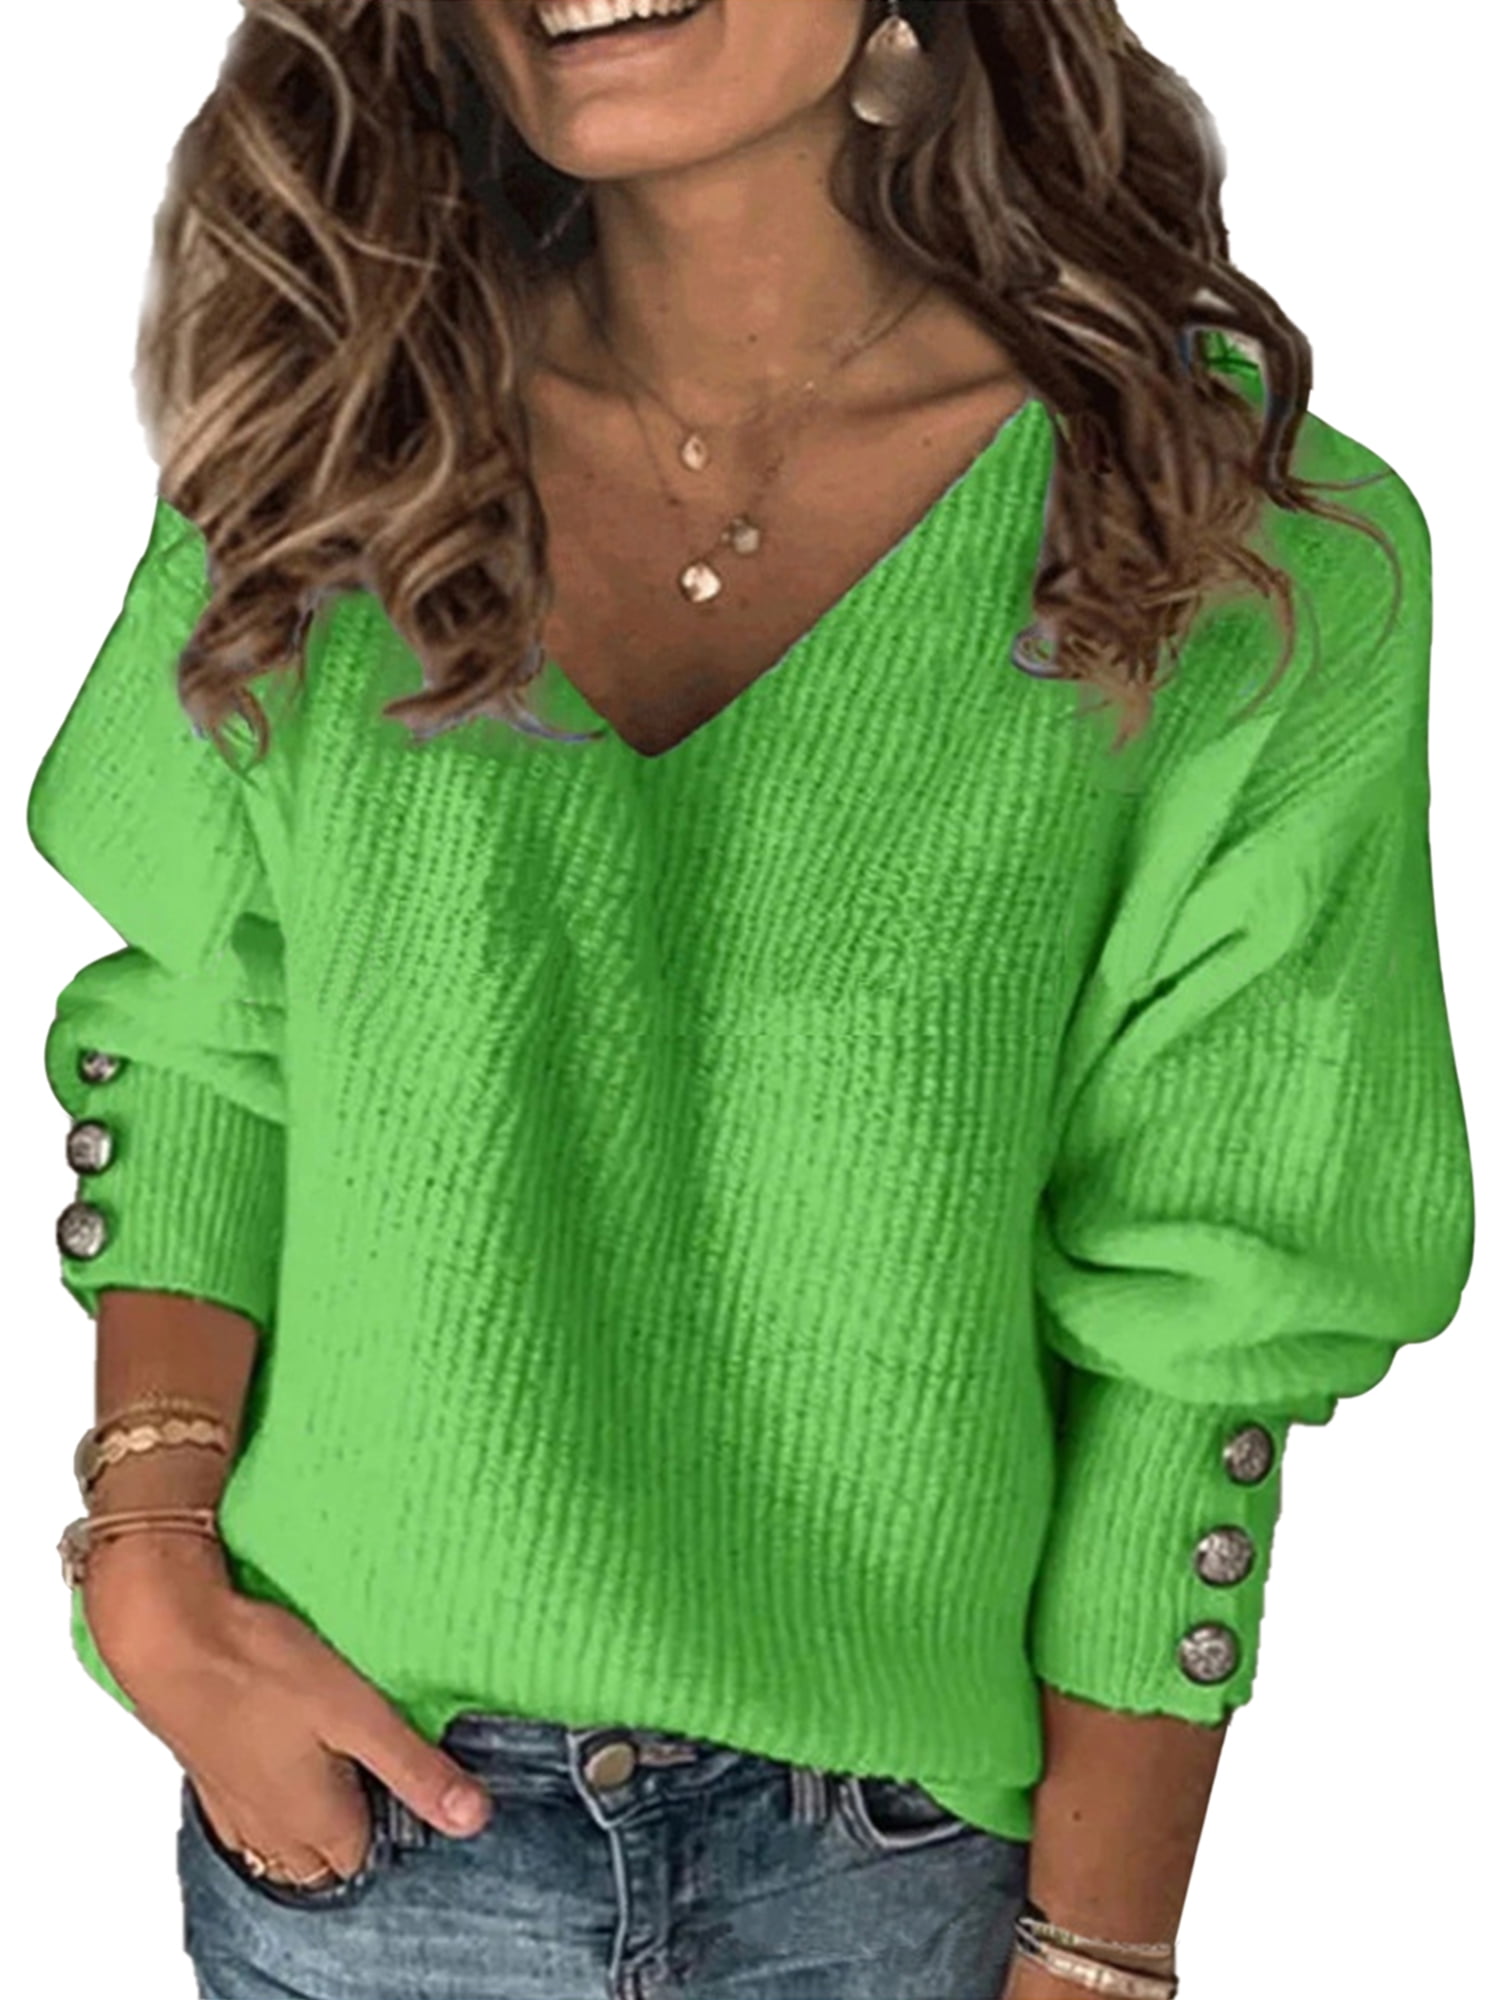 Women Sweaters Under 10 Dollars Winter Turtleneck Fashion Warm Cat Button Long Sleeve Casual Pullover Jumper Tops 5XL 